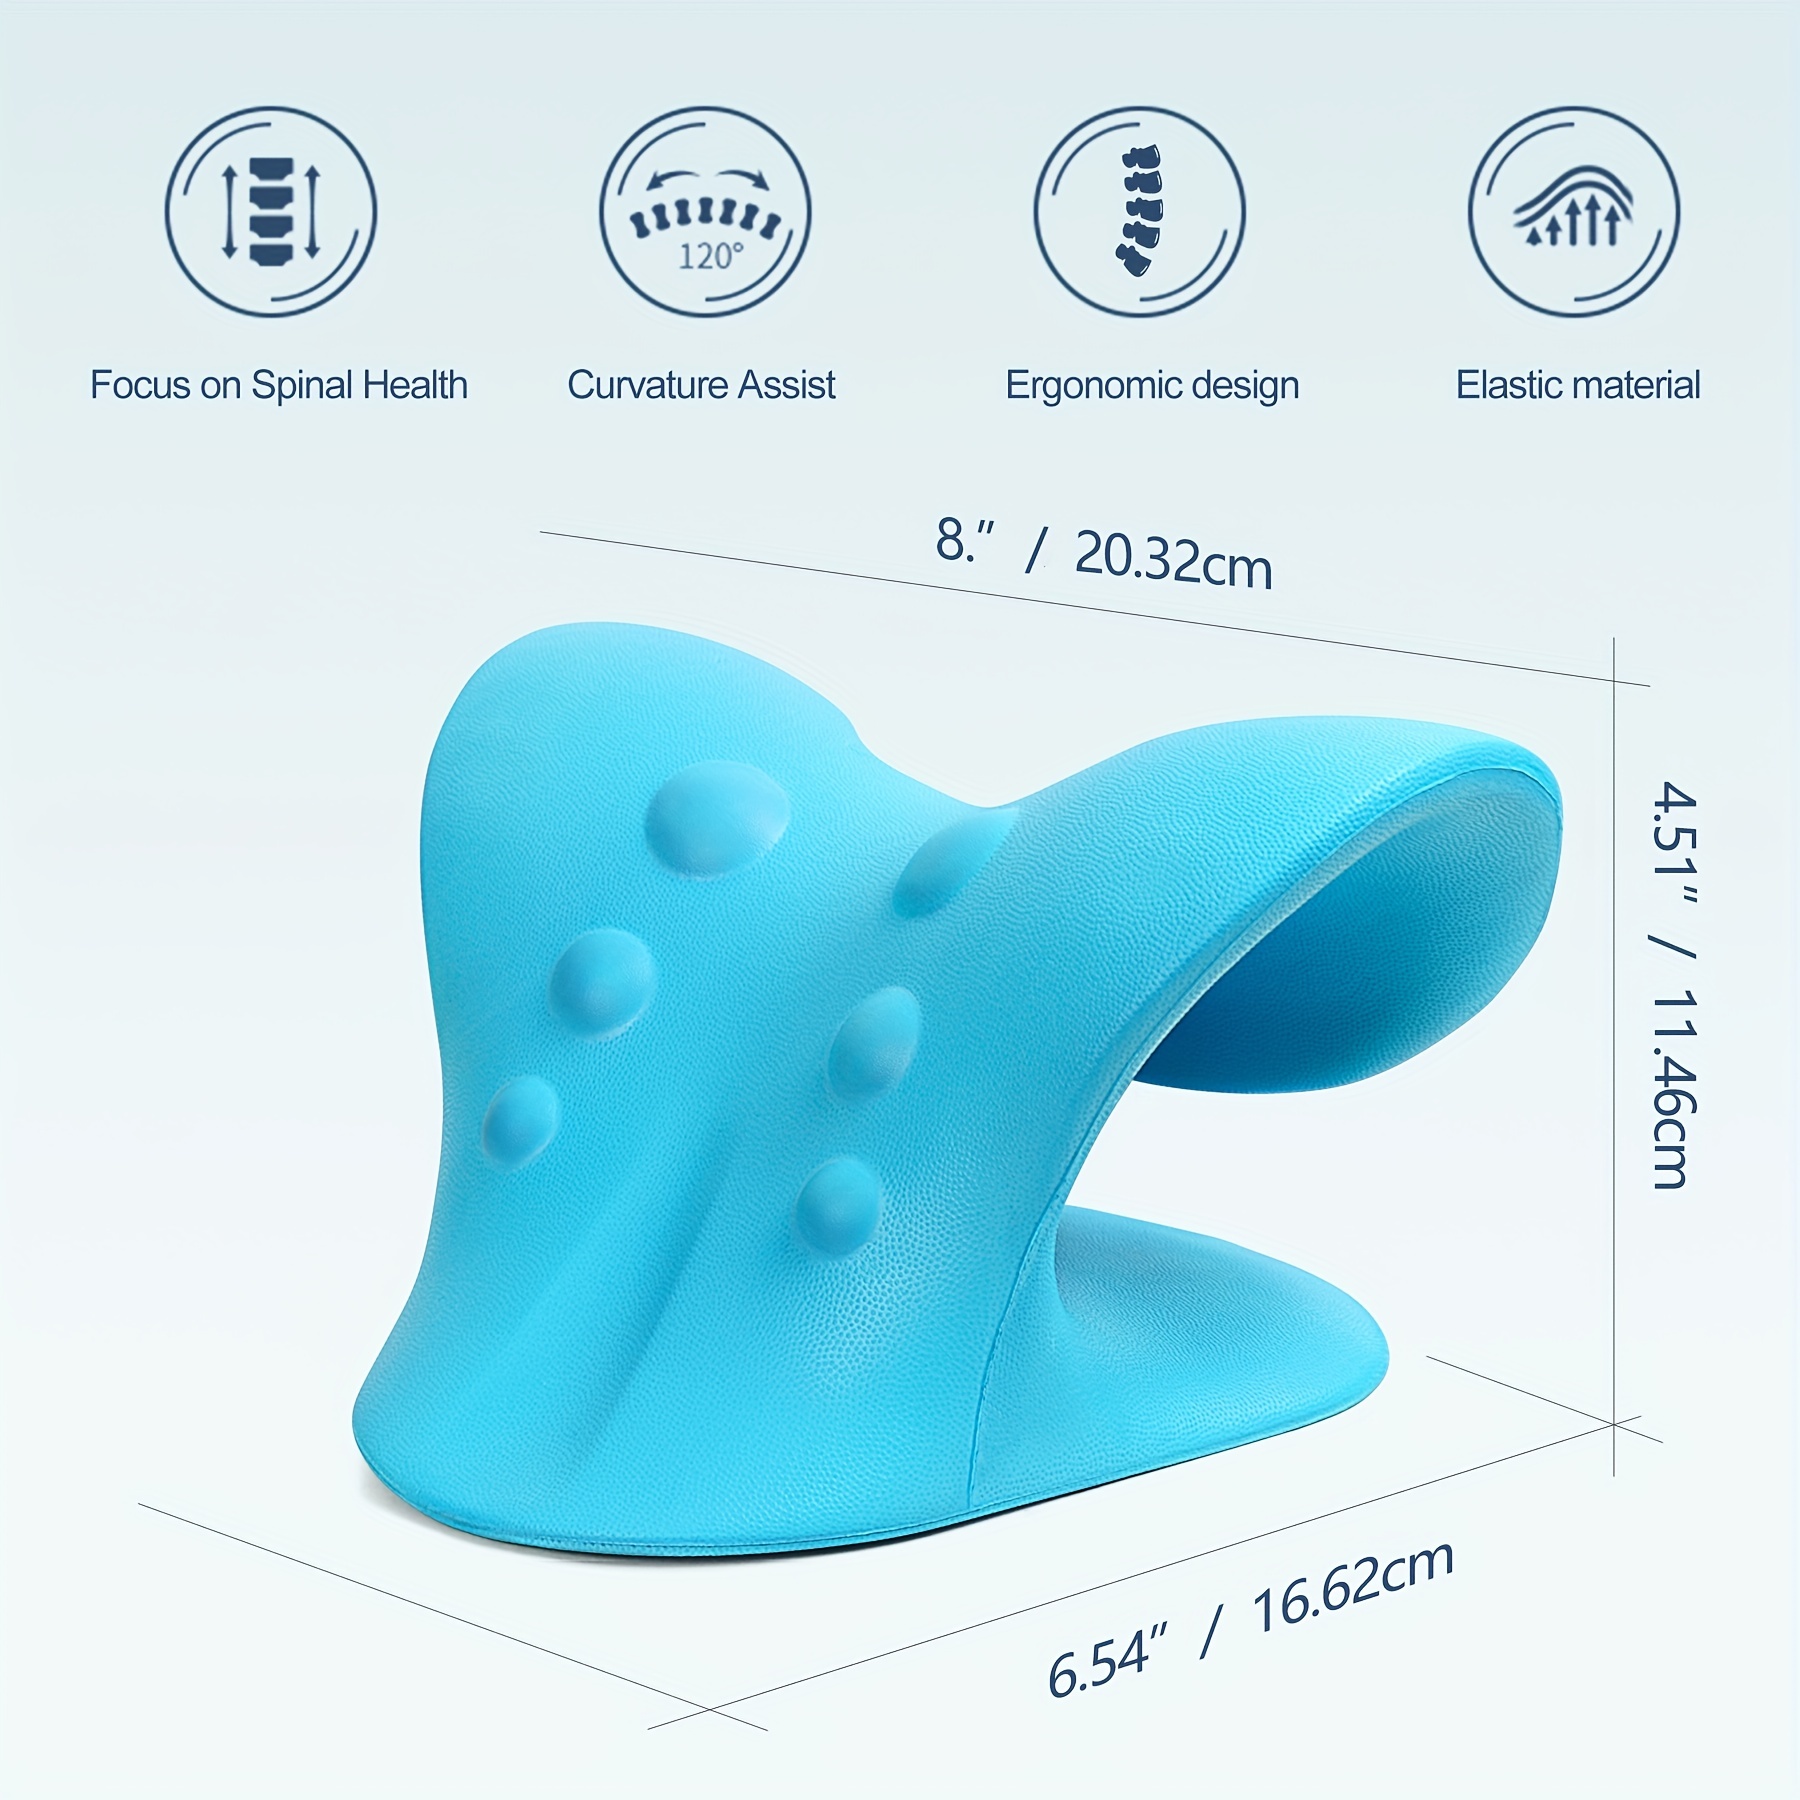 RESTCLOUD Neck and Shoulder Relaxer, Cervical Traction Device for TMJ Pain Relief and Cervical Spine Alignment, Chiropractic Pillow Neck Stretcher